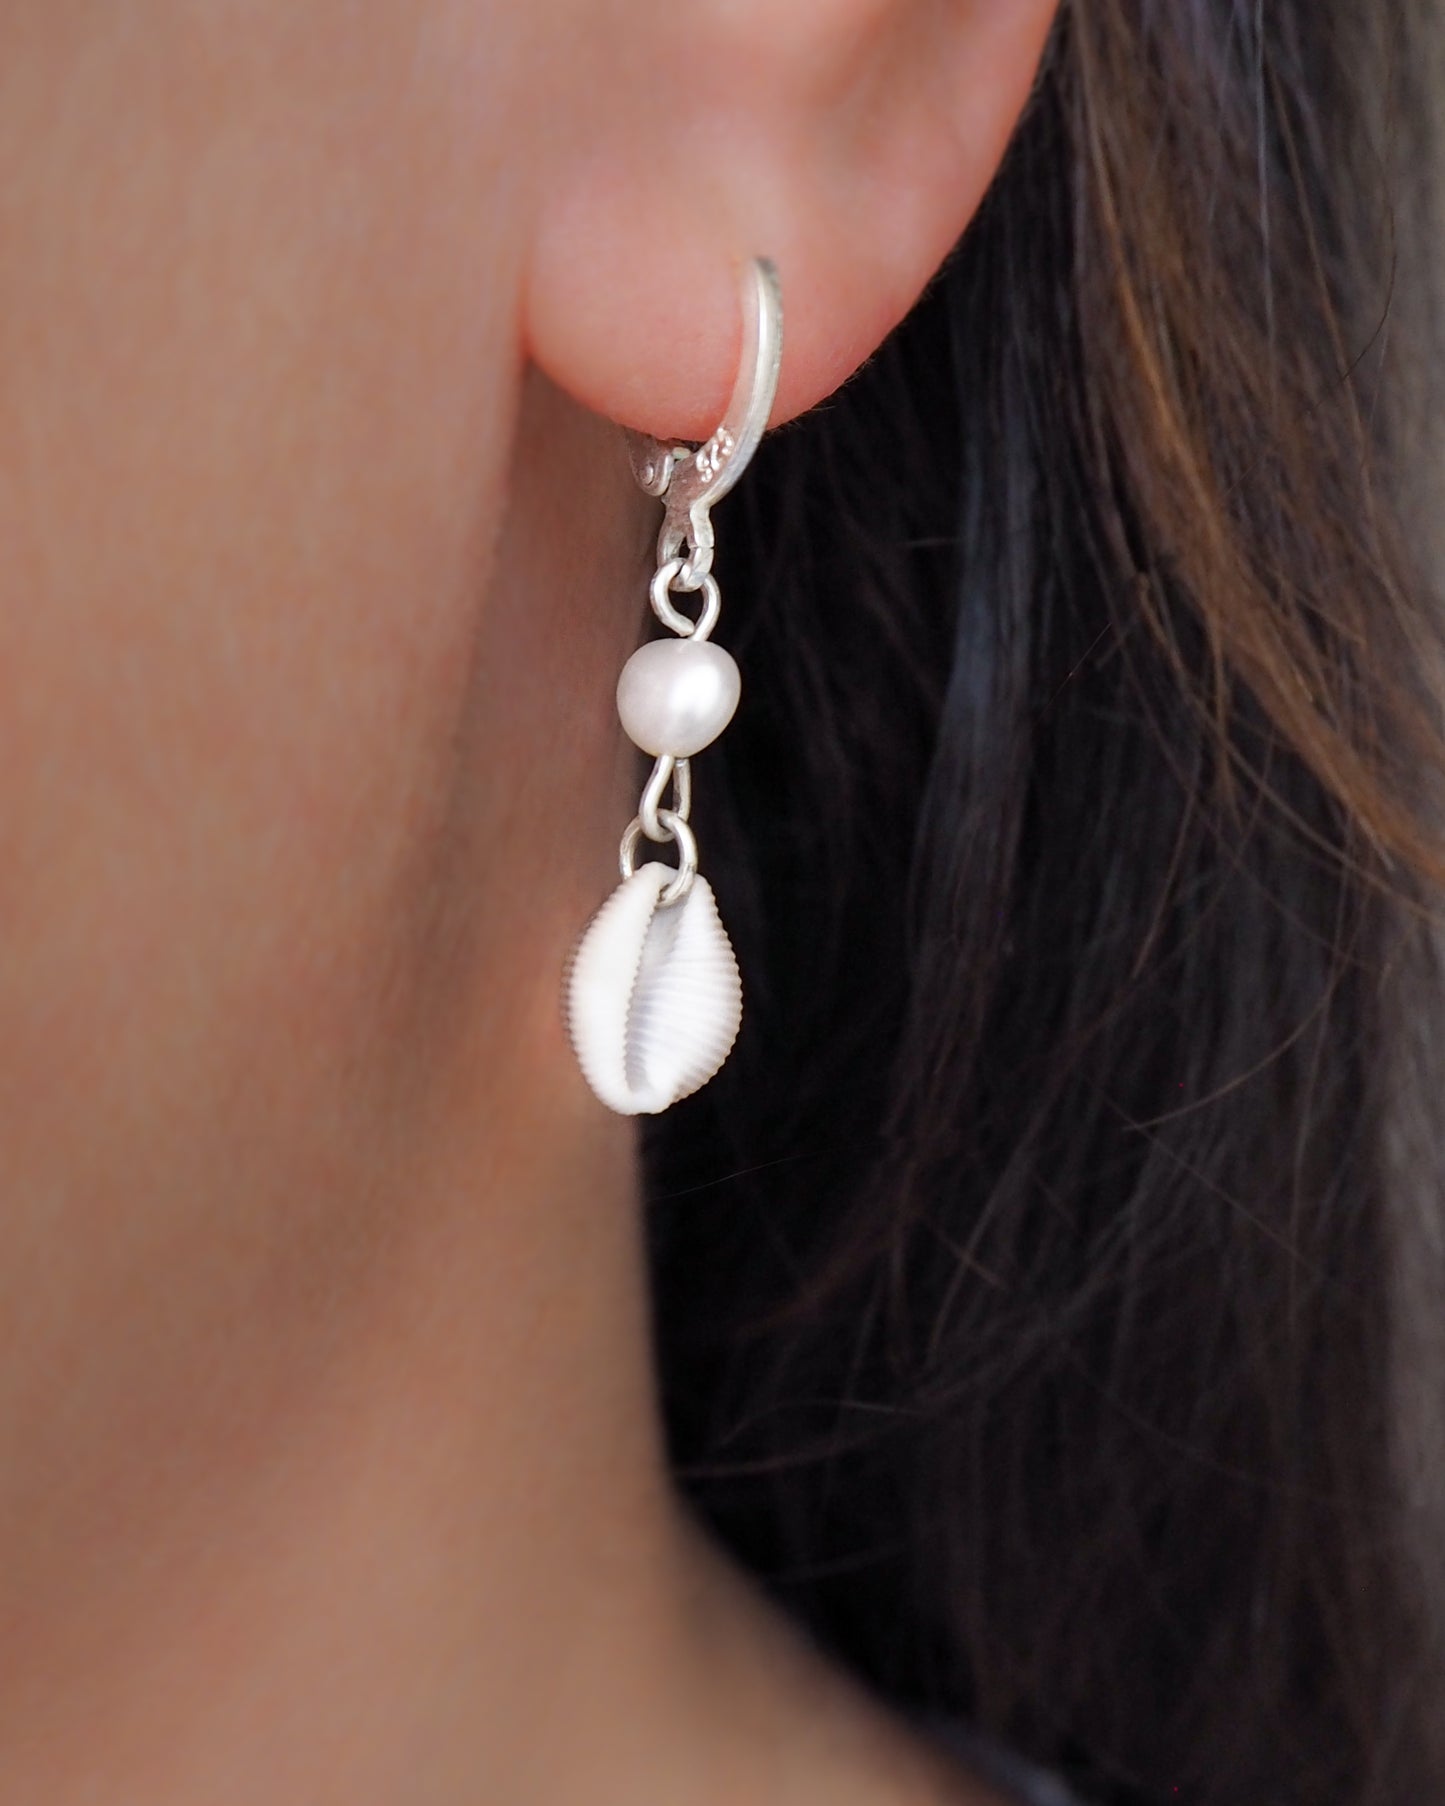 Model wearing Cowrie Shell Pearl Earrings from Portugal, Freshwater pearls with real Kauri shells